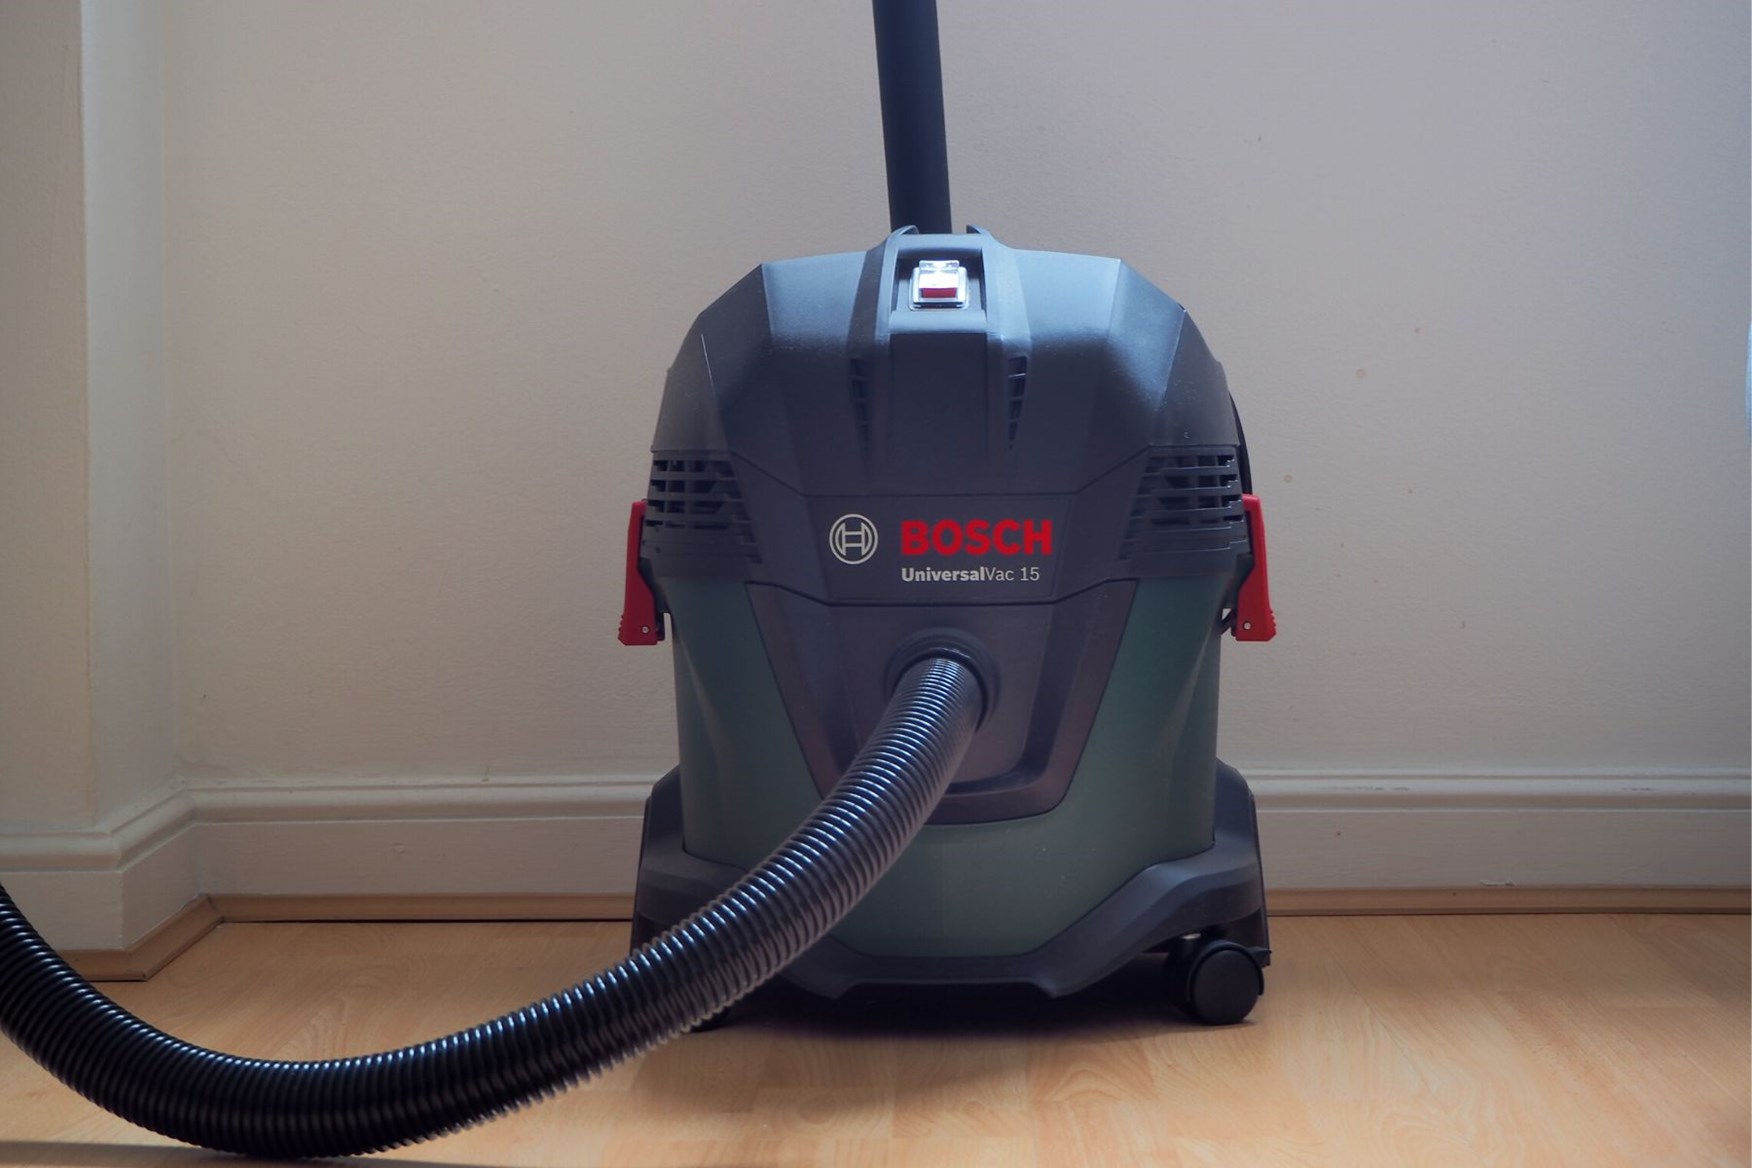 KARCHER WD3 Review and Unboxing  A must-have in any household 